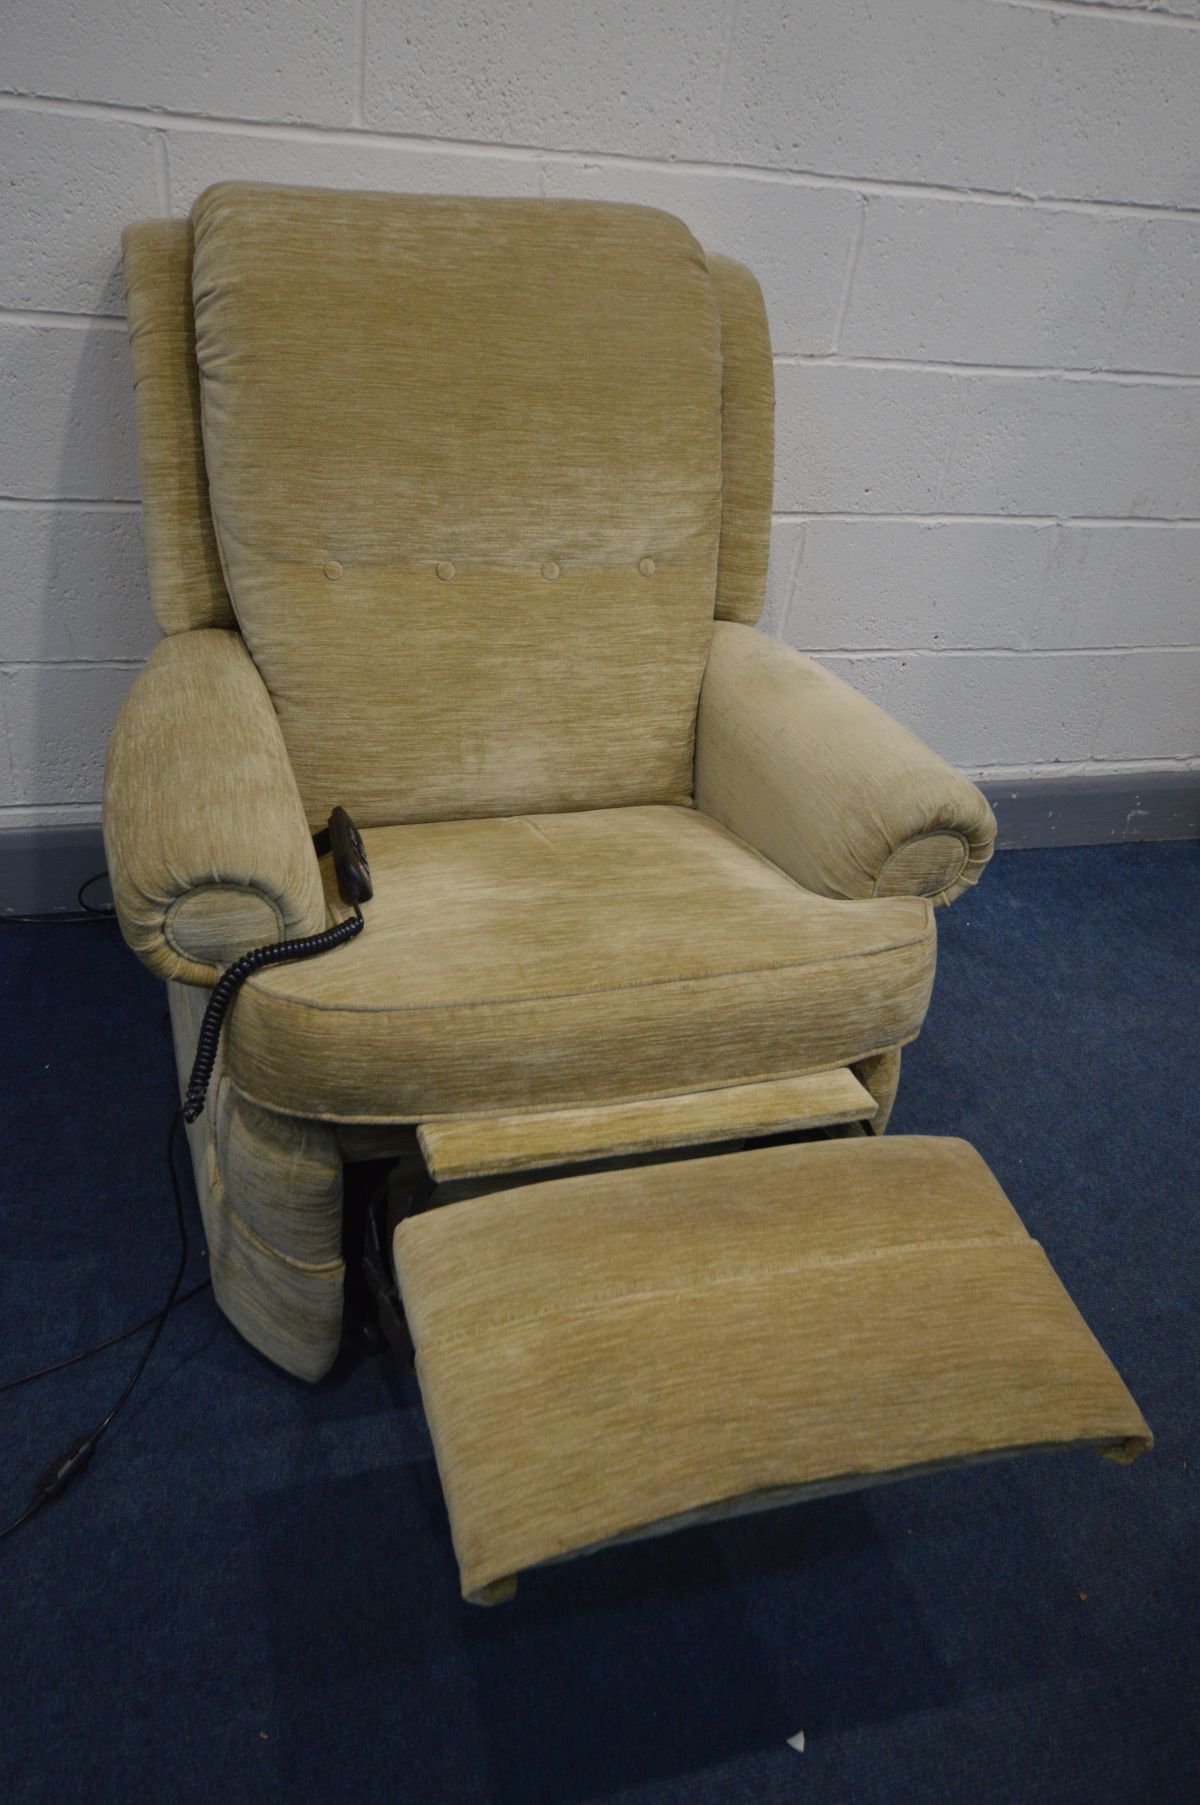 A G PLAN BEIGE UPHOLSTERED ELECTRIC RISE AND RECLINE ARMCHAIR (PAT pass and working) - Image 3 of 5